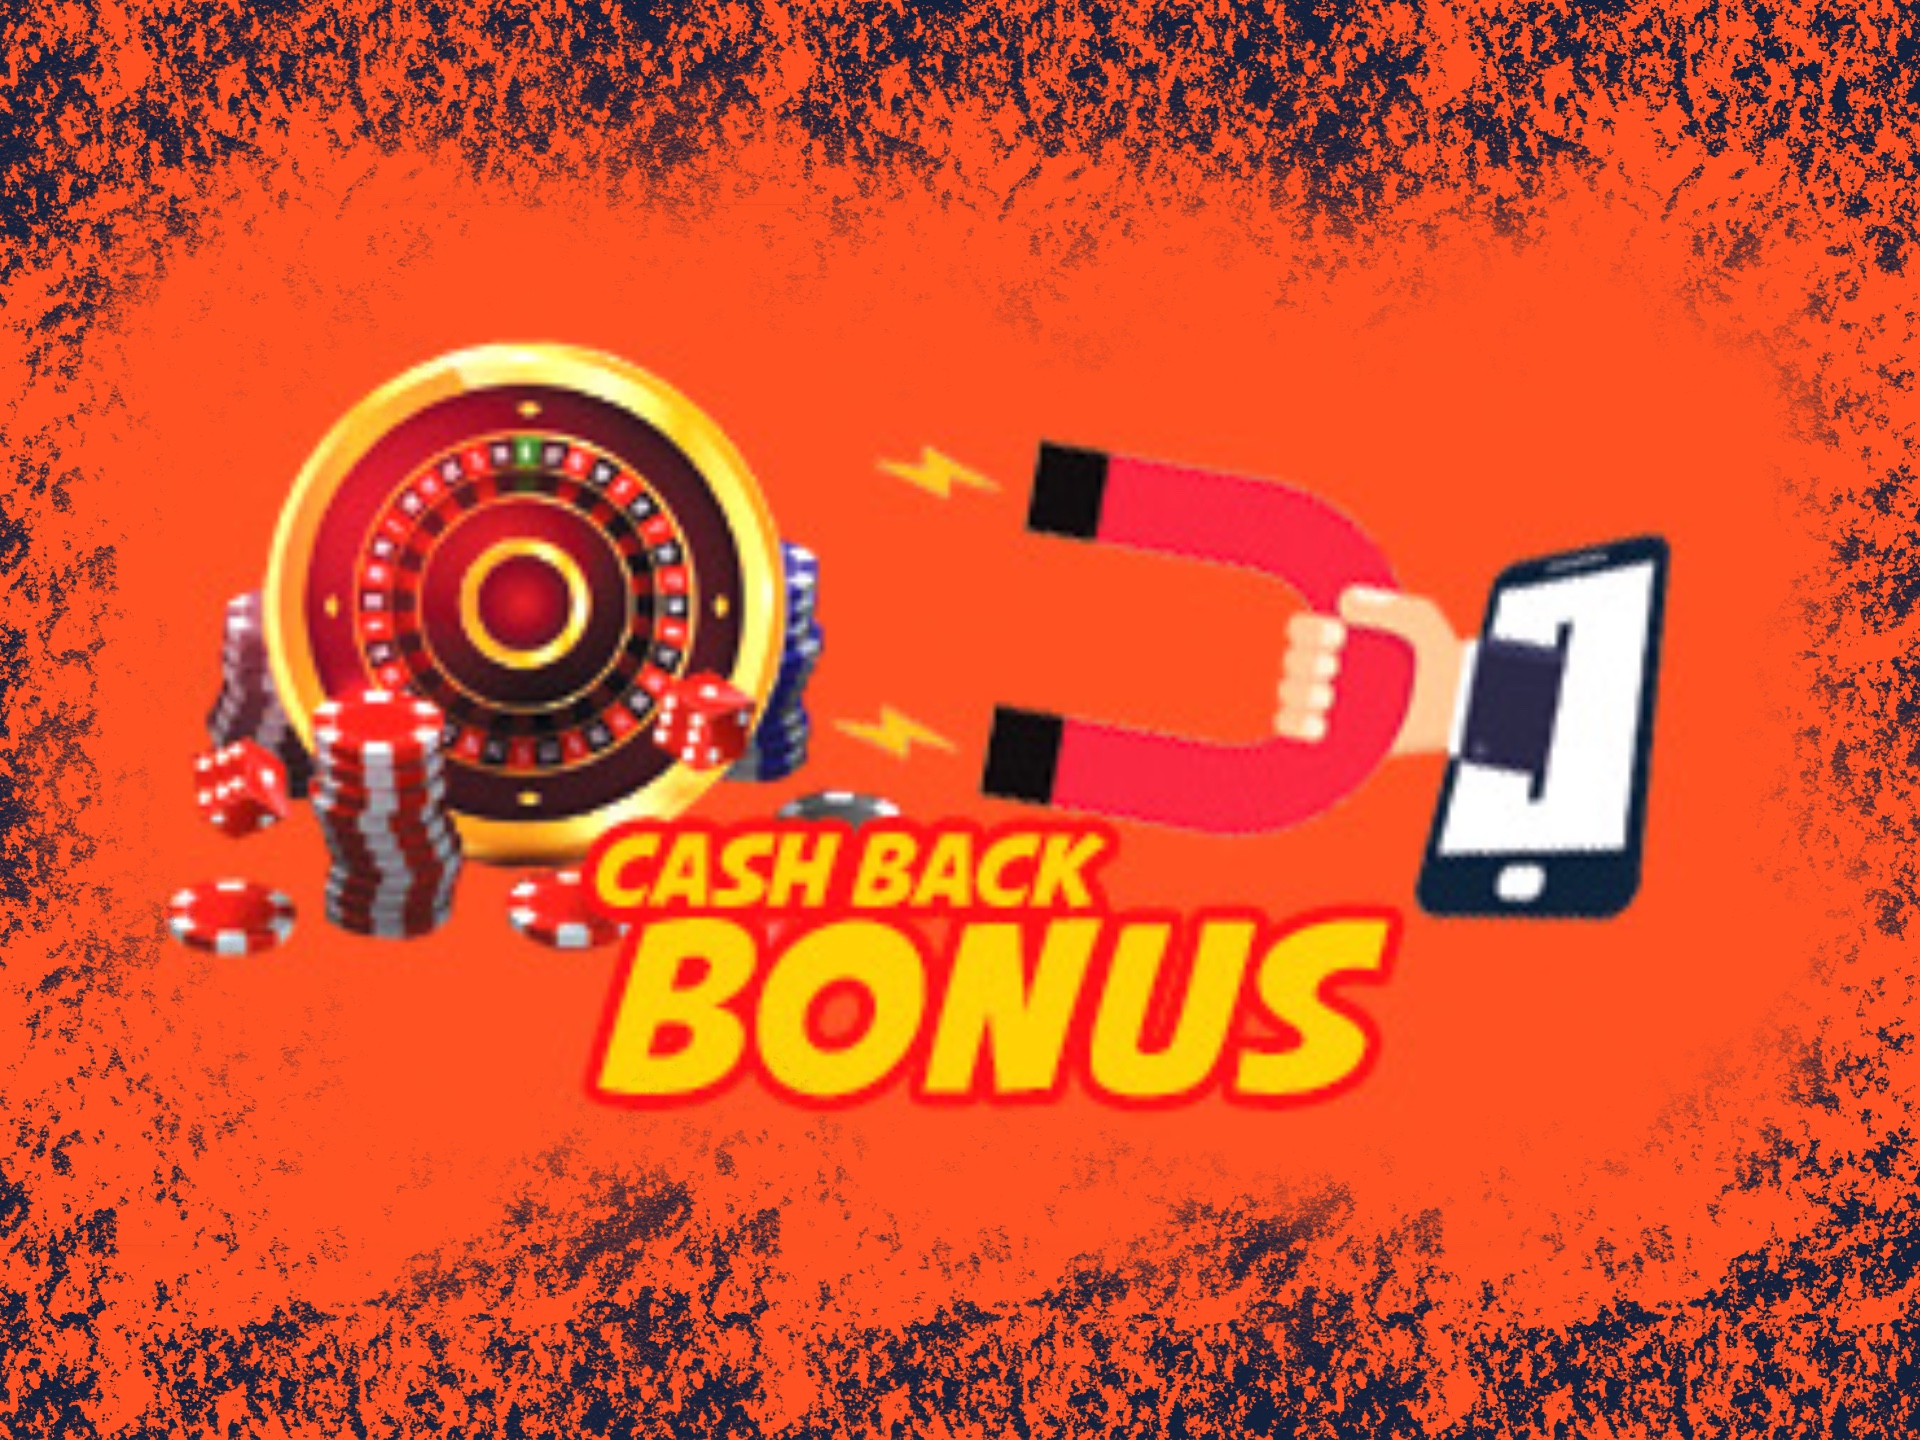 The more you plat online casino games the bigger cashback you get as a bonus for your loyalty.